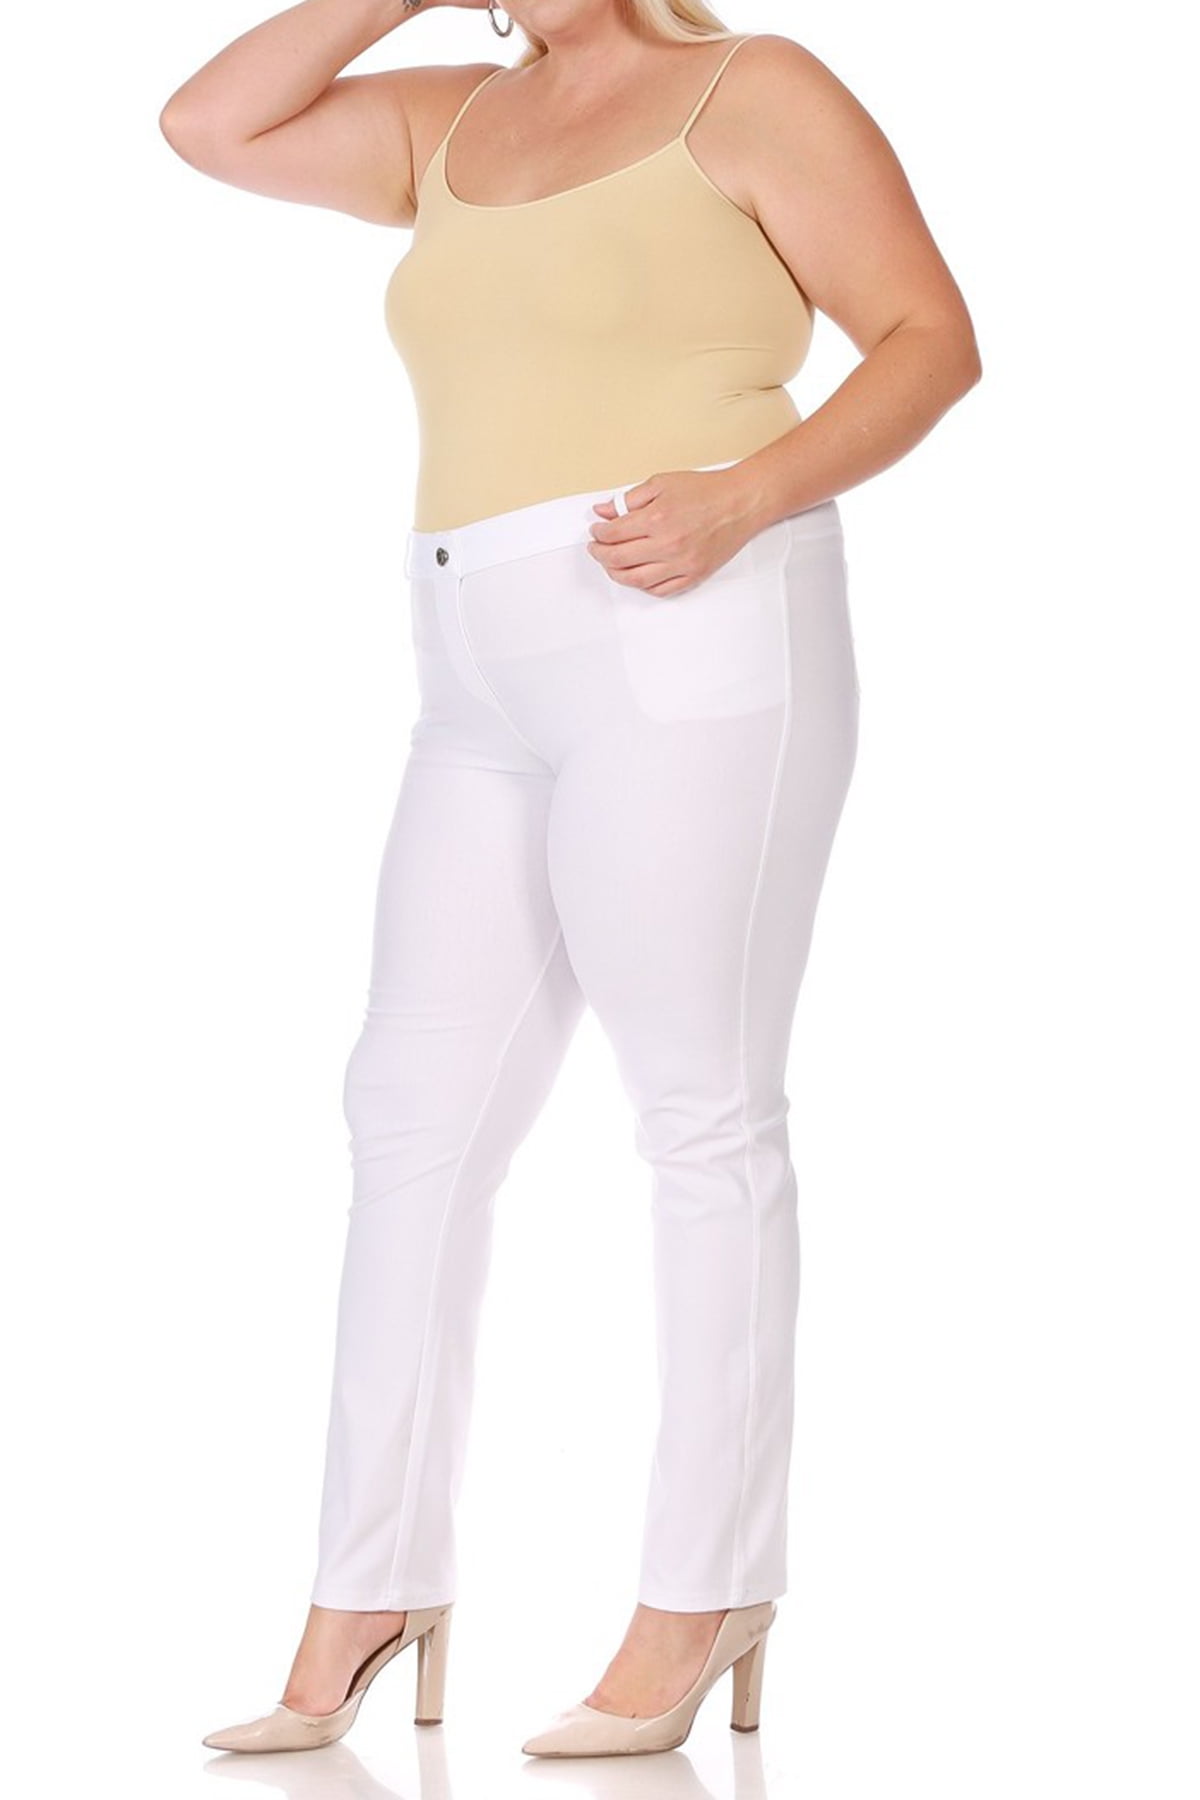 Women's Plus Size Comfy Slim Pocket Jeggings Jeans Pants with Button (Pack  of 2)